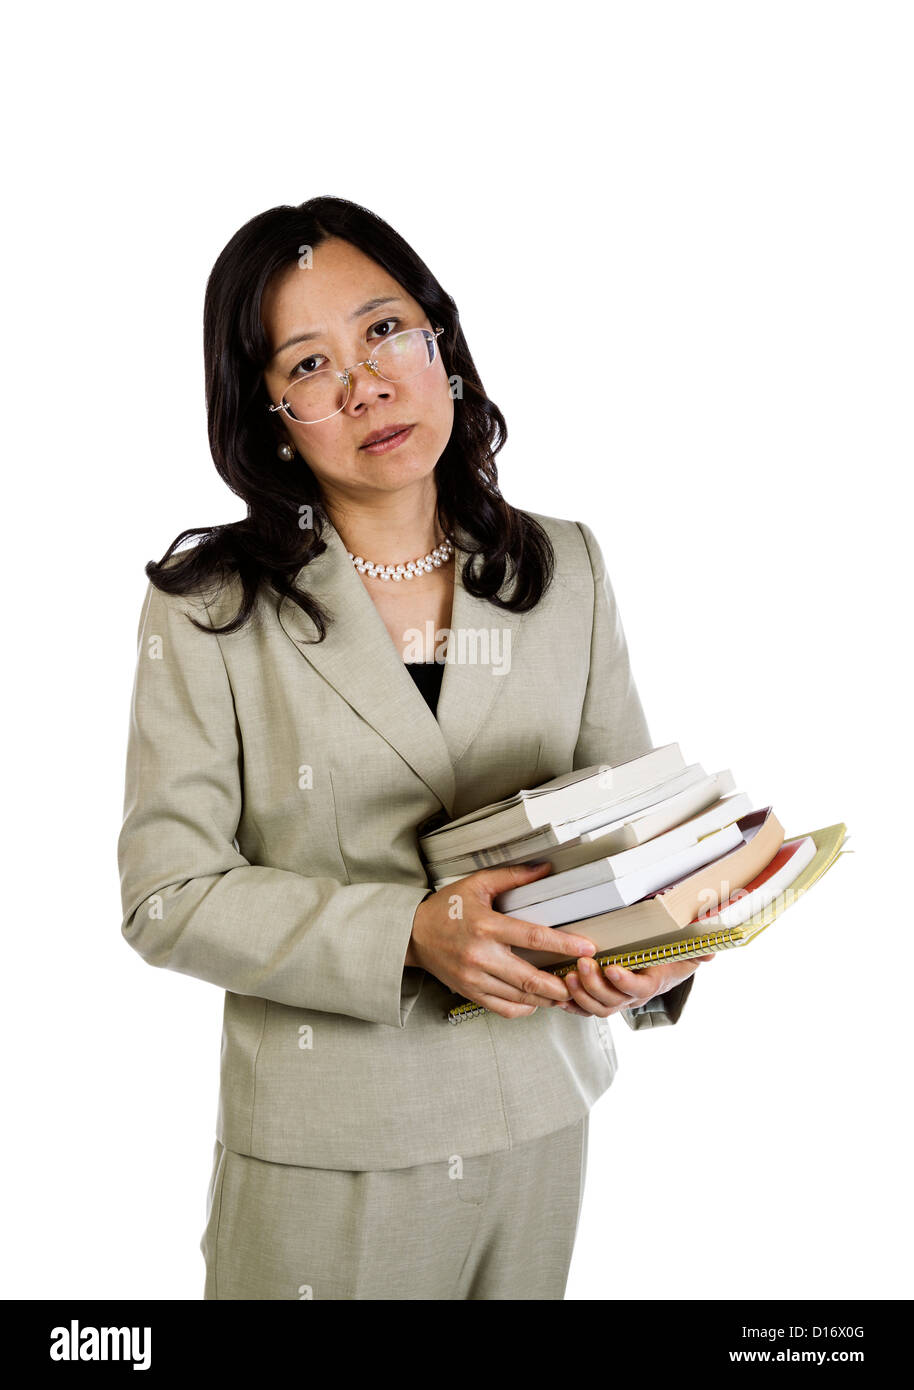 Mature Asian Woman being over worked holding stack of books on white background Stock Photo